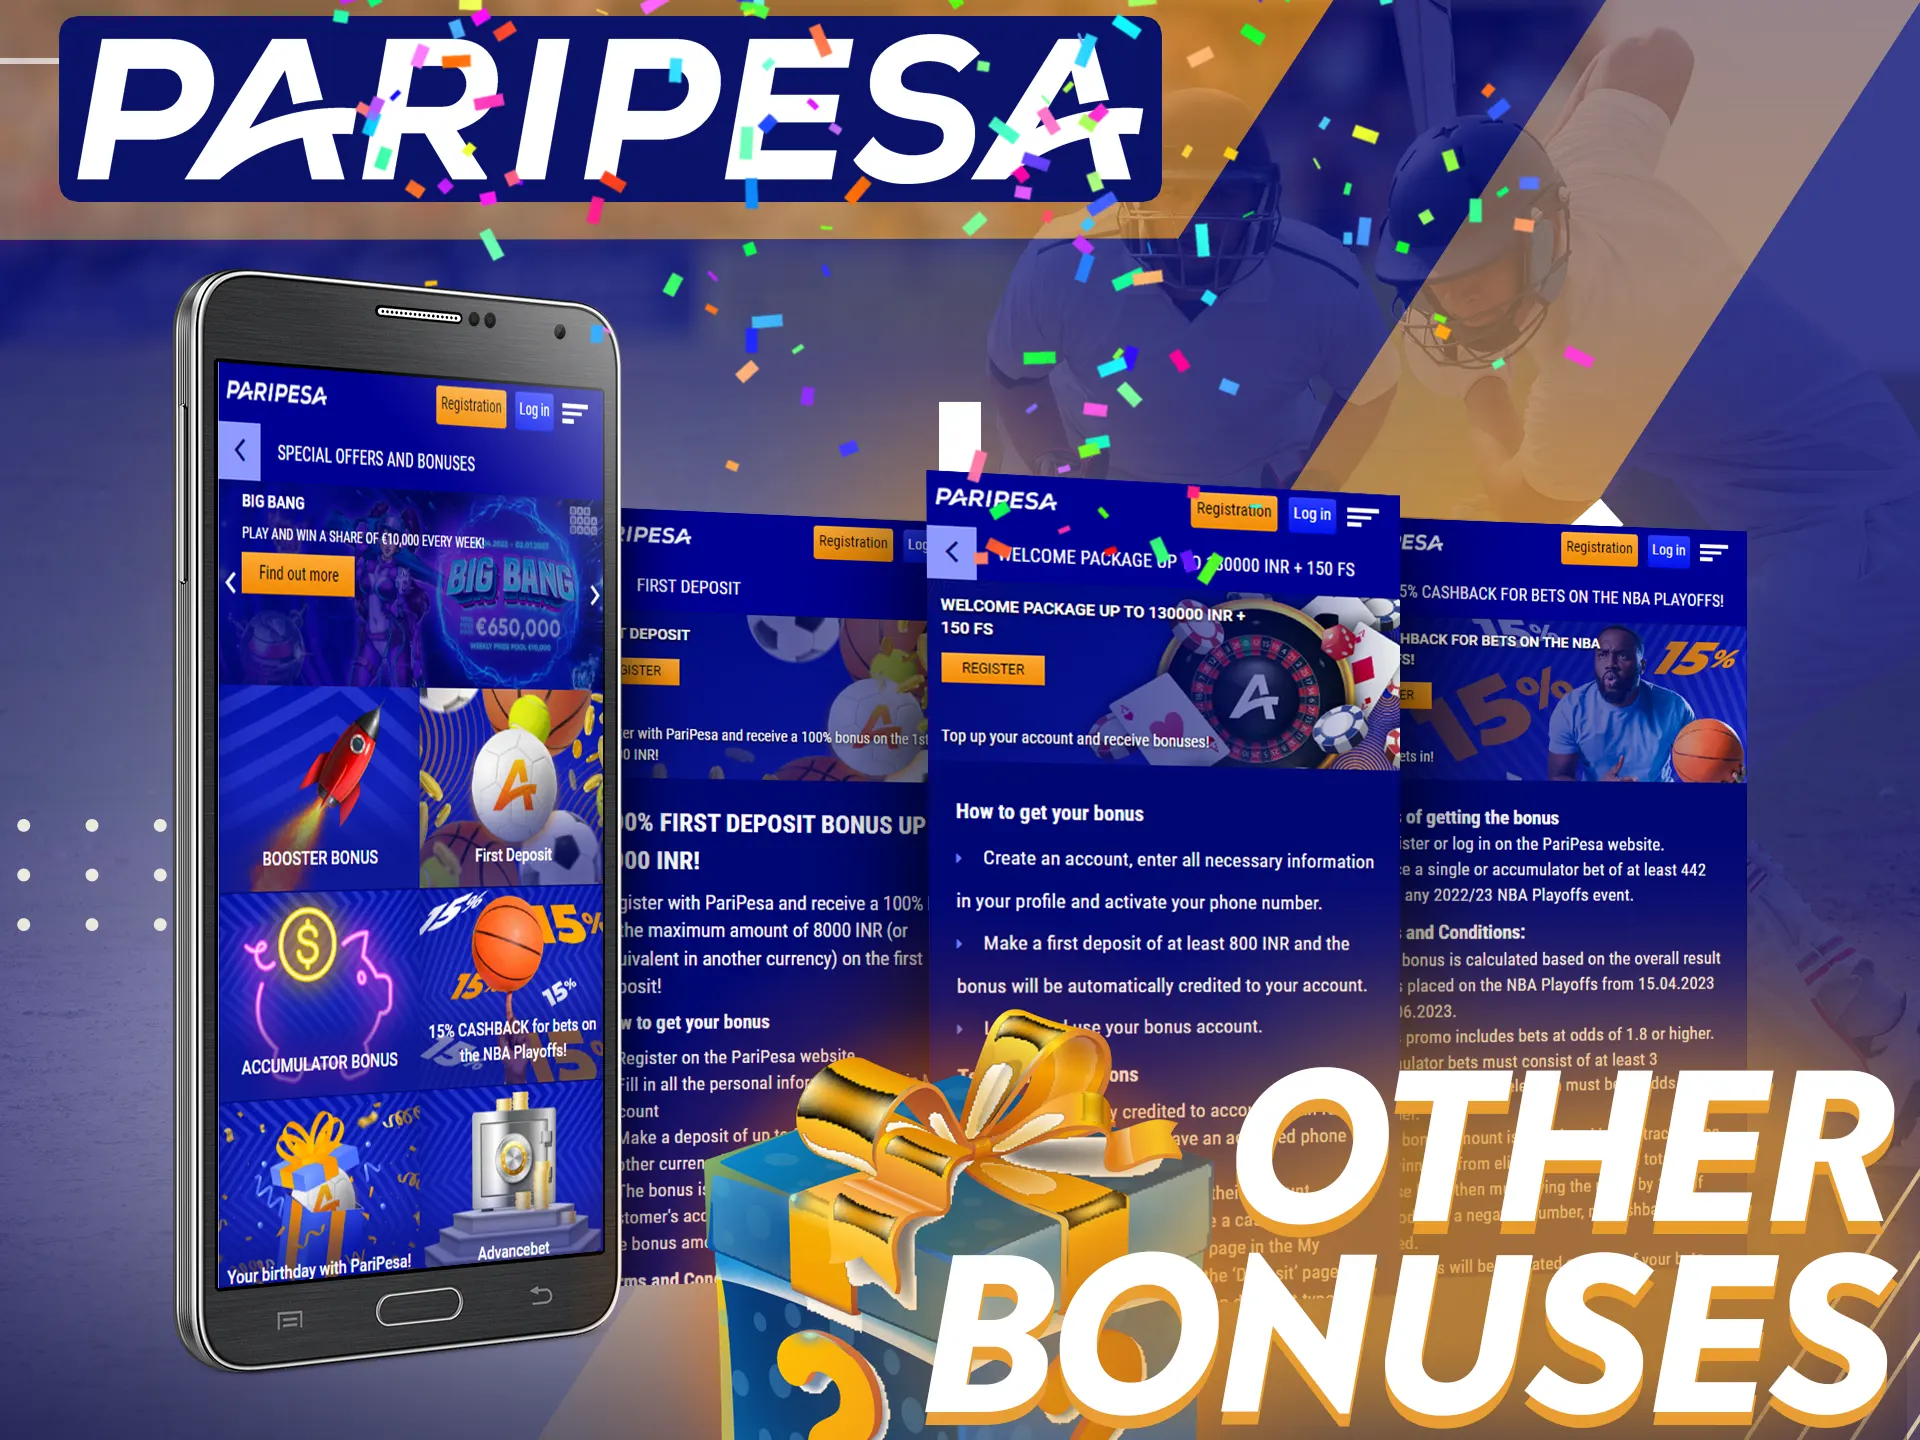 Explore the other bonuses that Paripesa offers players.